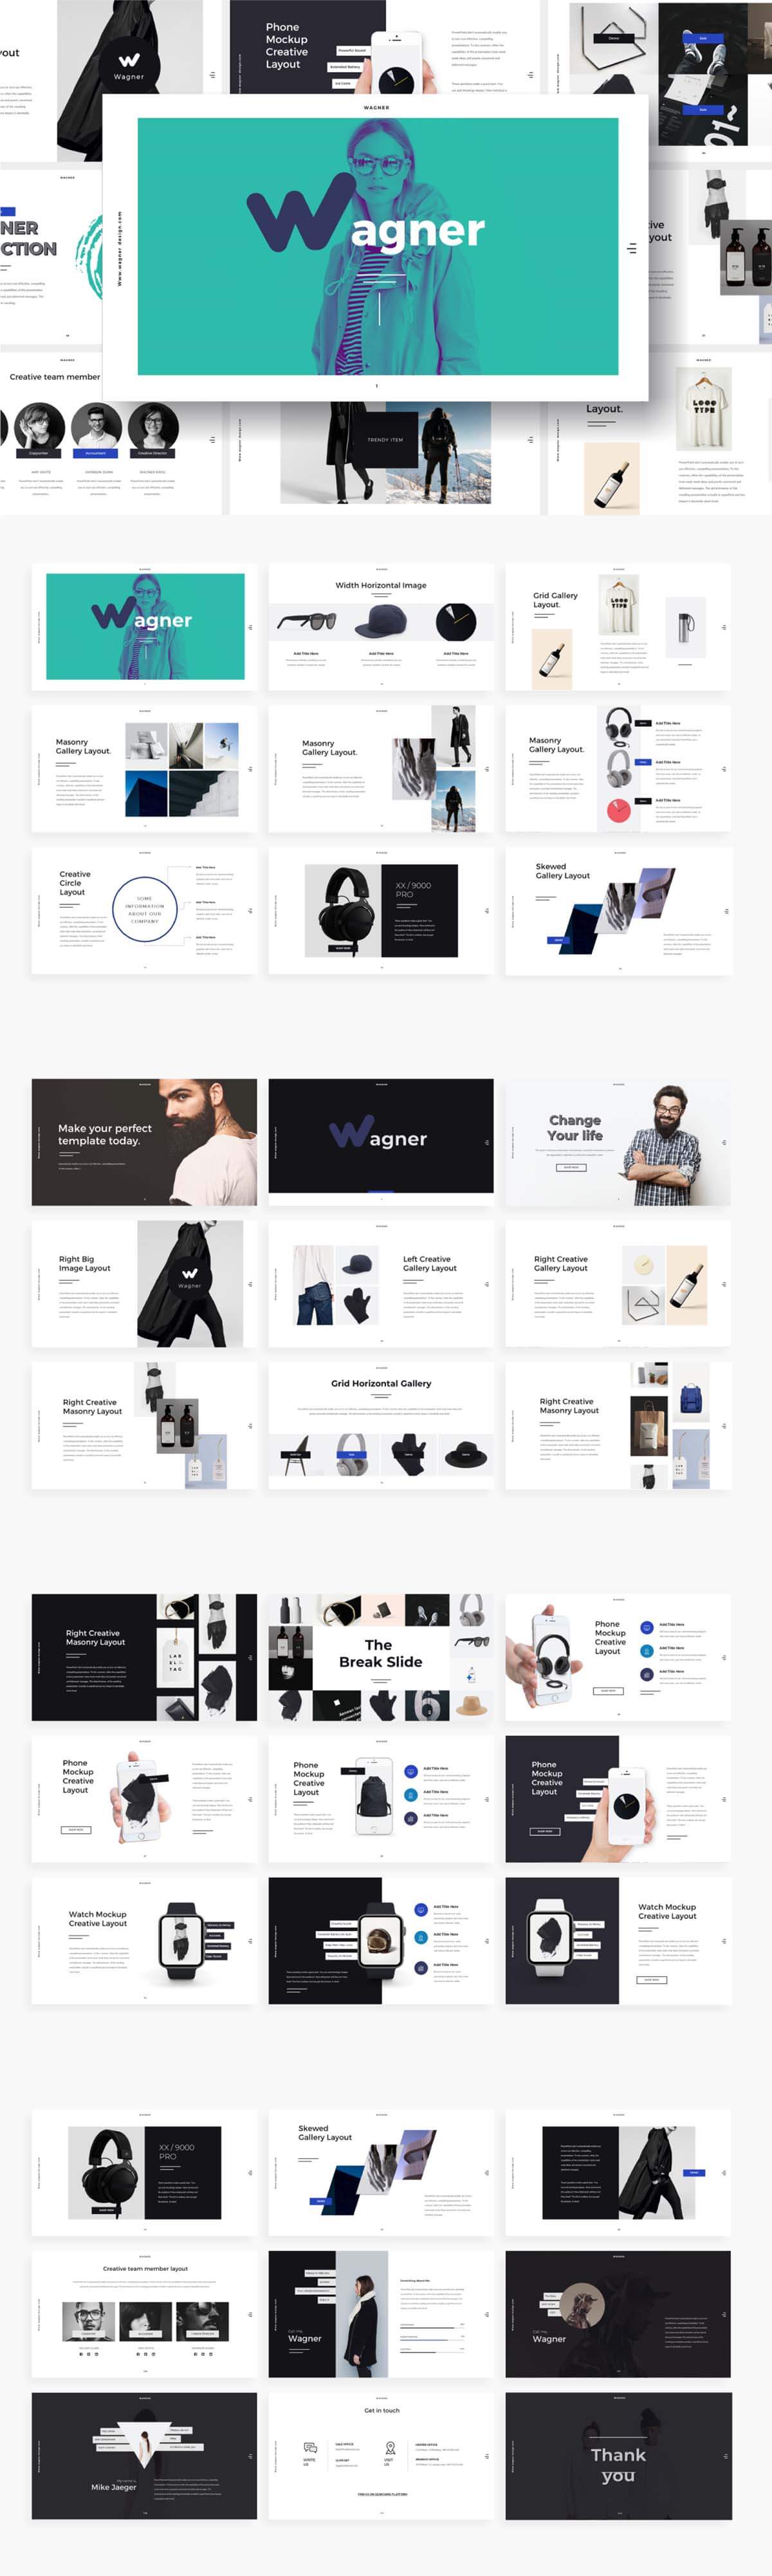 WAGNER - FREE MULTIPURPOSE POWERPOINT TEMPLATE